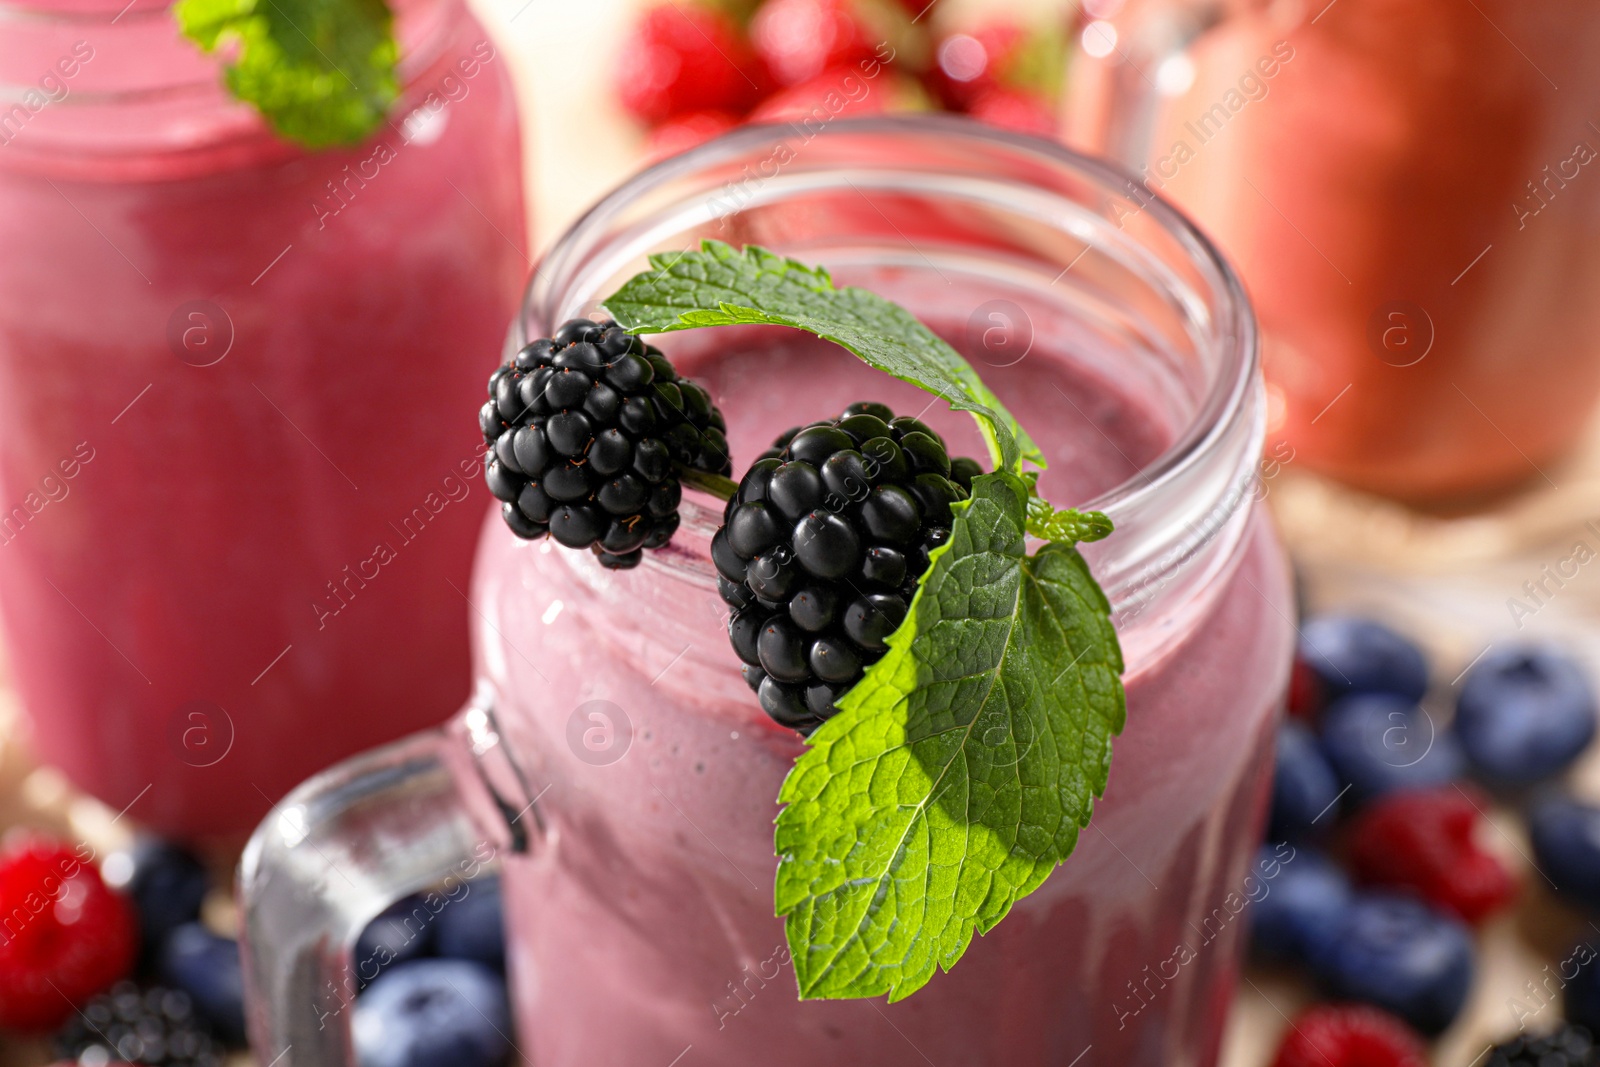 Photo of Mason jar of tasty smoothie with fresh blackberry and mint, closeup